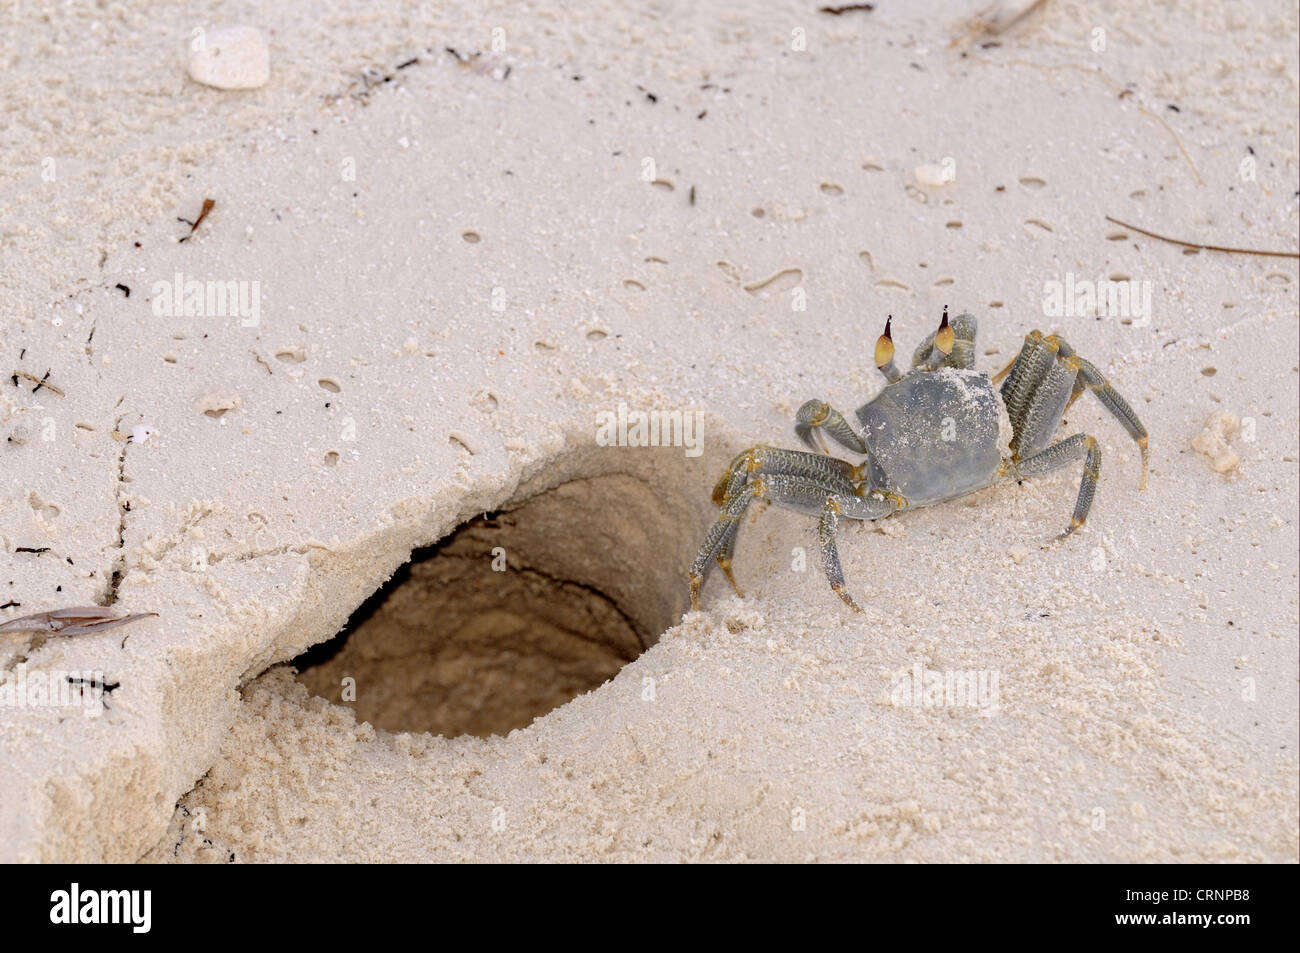 Horned Ghost Crab (Ocypode ceratophthalmus) adult, standing at entrance to burrow on sandy beach, Maldives, march Stock Photo